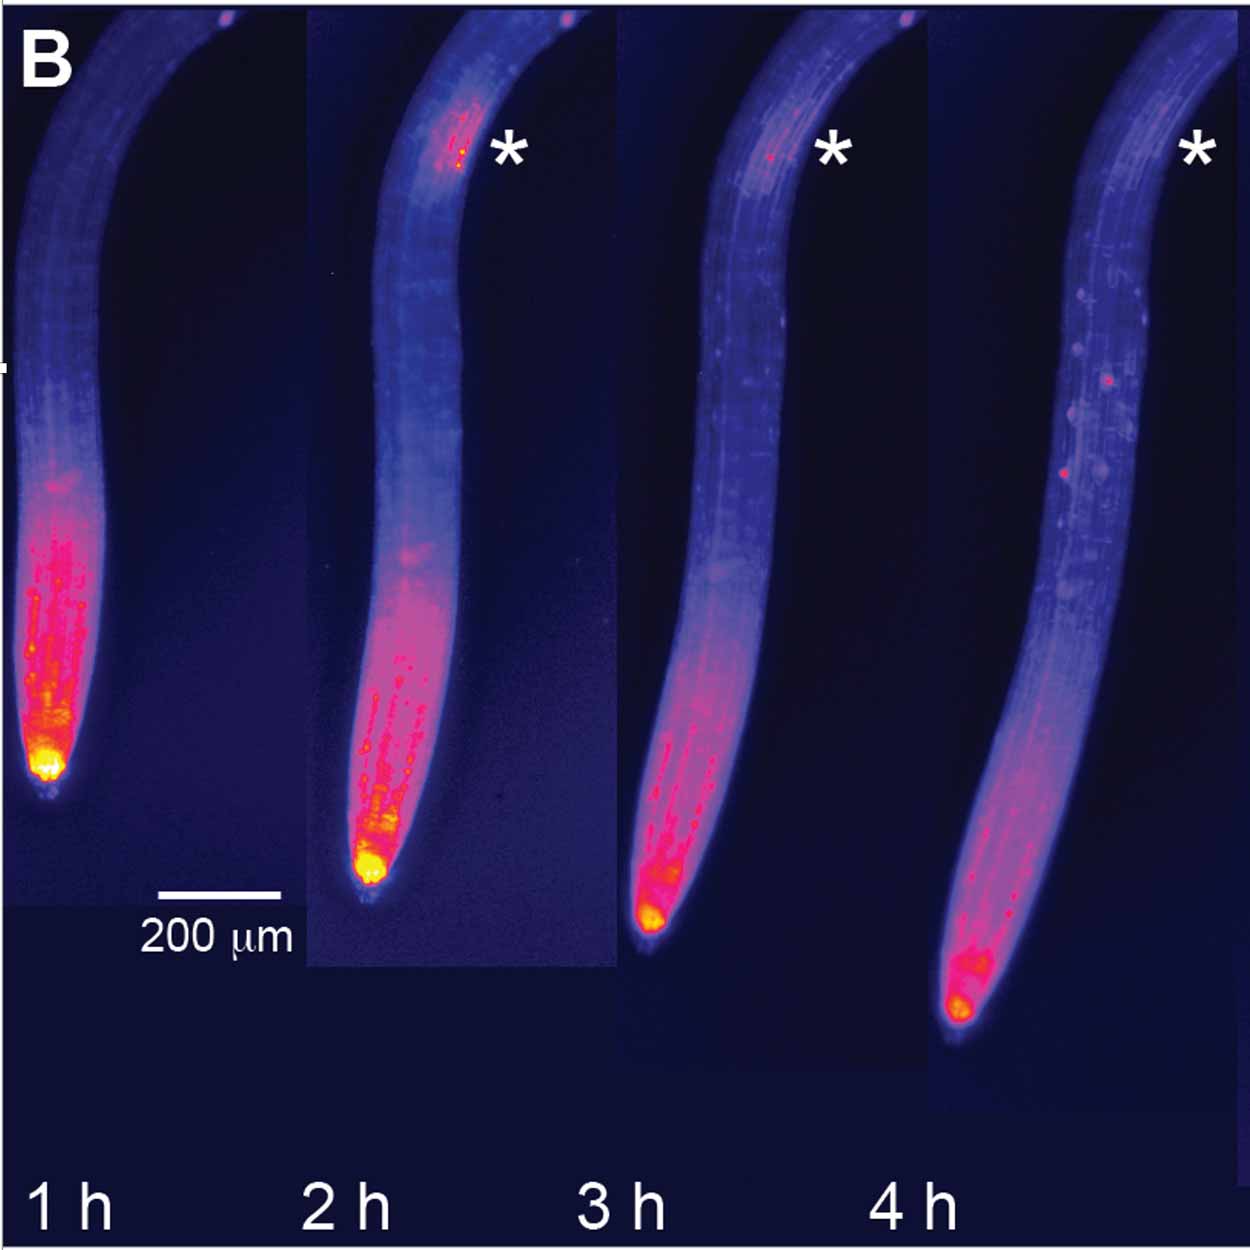 Root labeled with fluorescent dye at 1h, 2h, 3h and 4h timepoints growing over time.